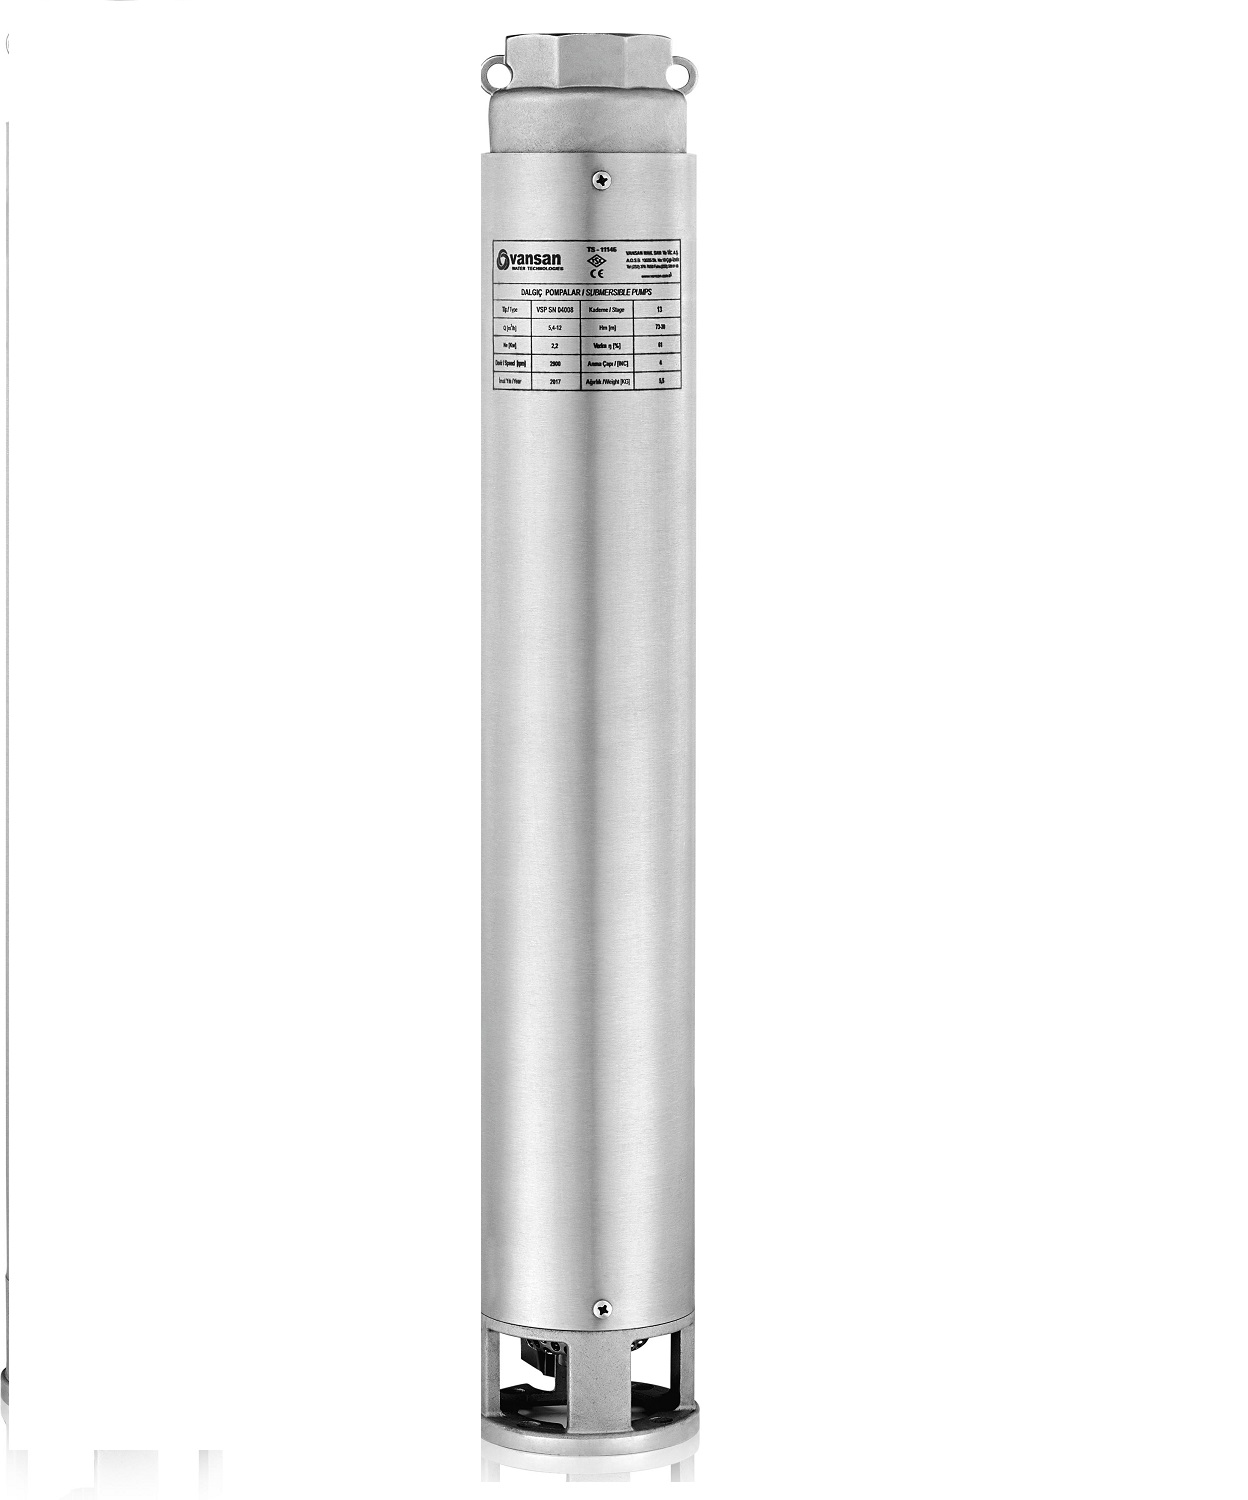 4inch Submersible Pumps